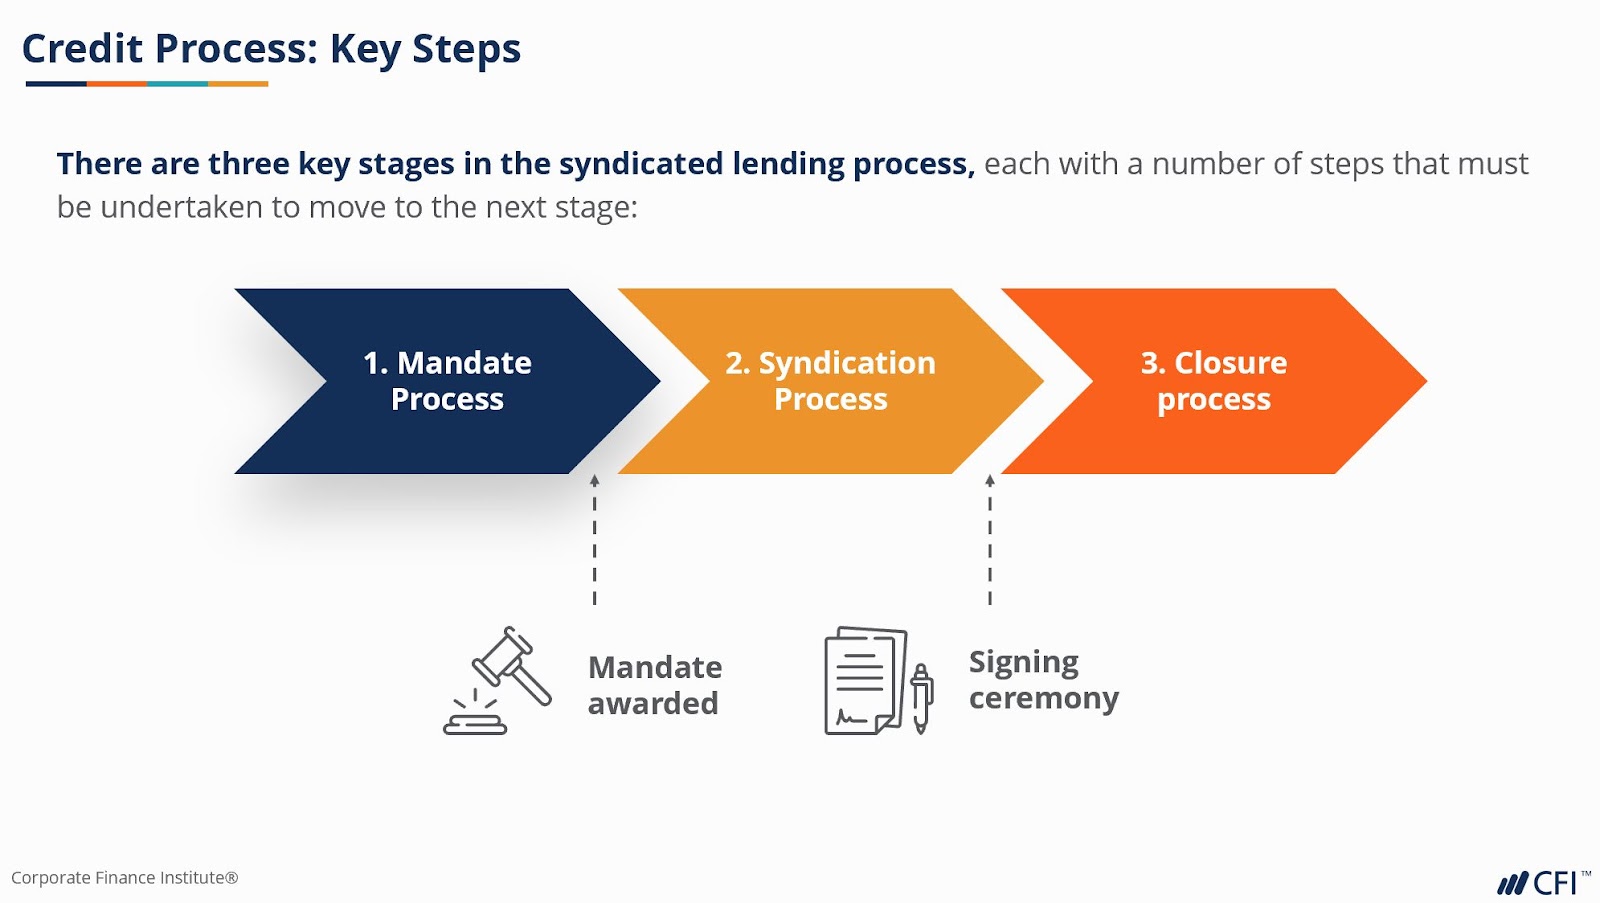 QUICK GUIDE TO SYNDICATED LENDING FOR FINANCIAL INSTITUTIONS